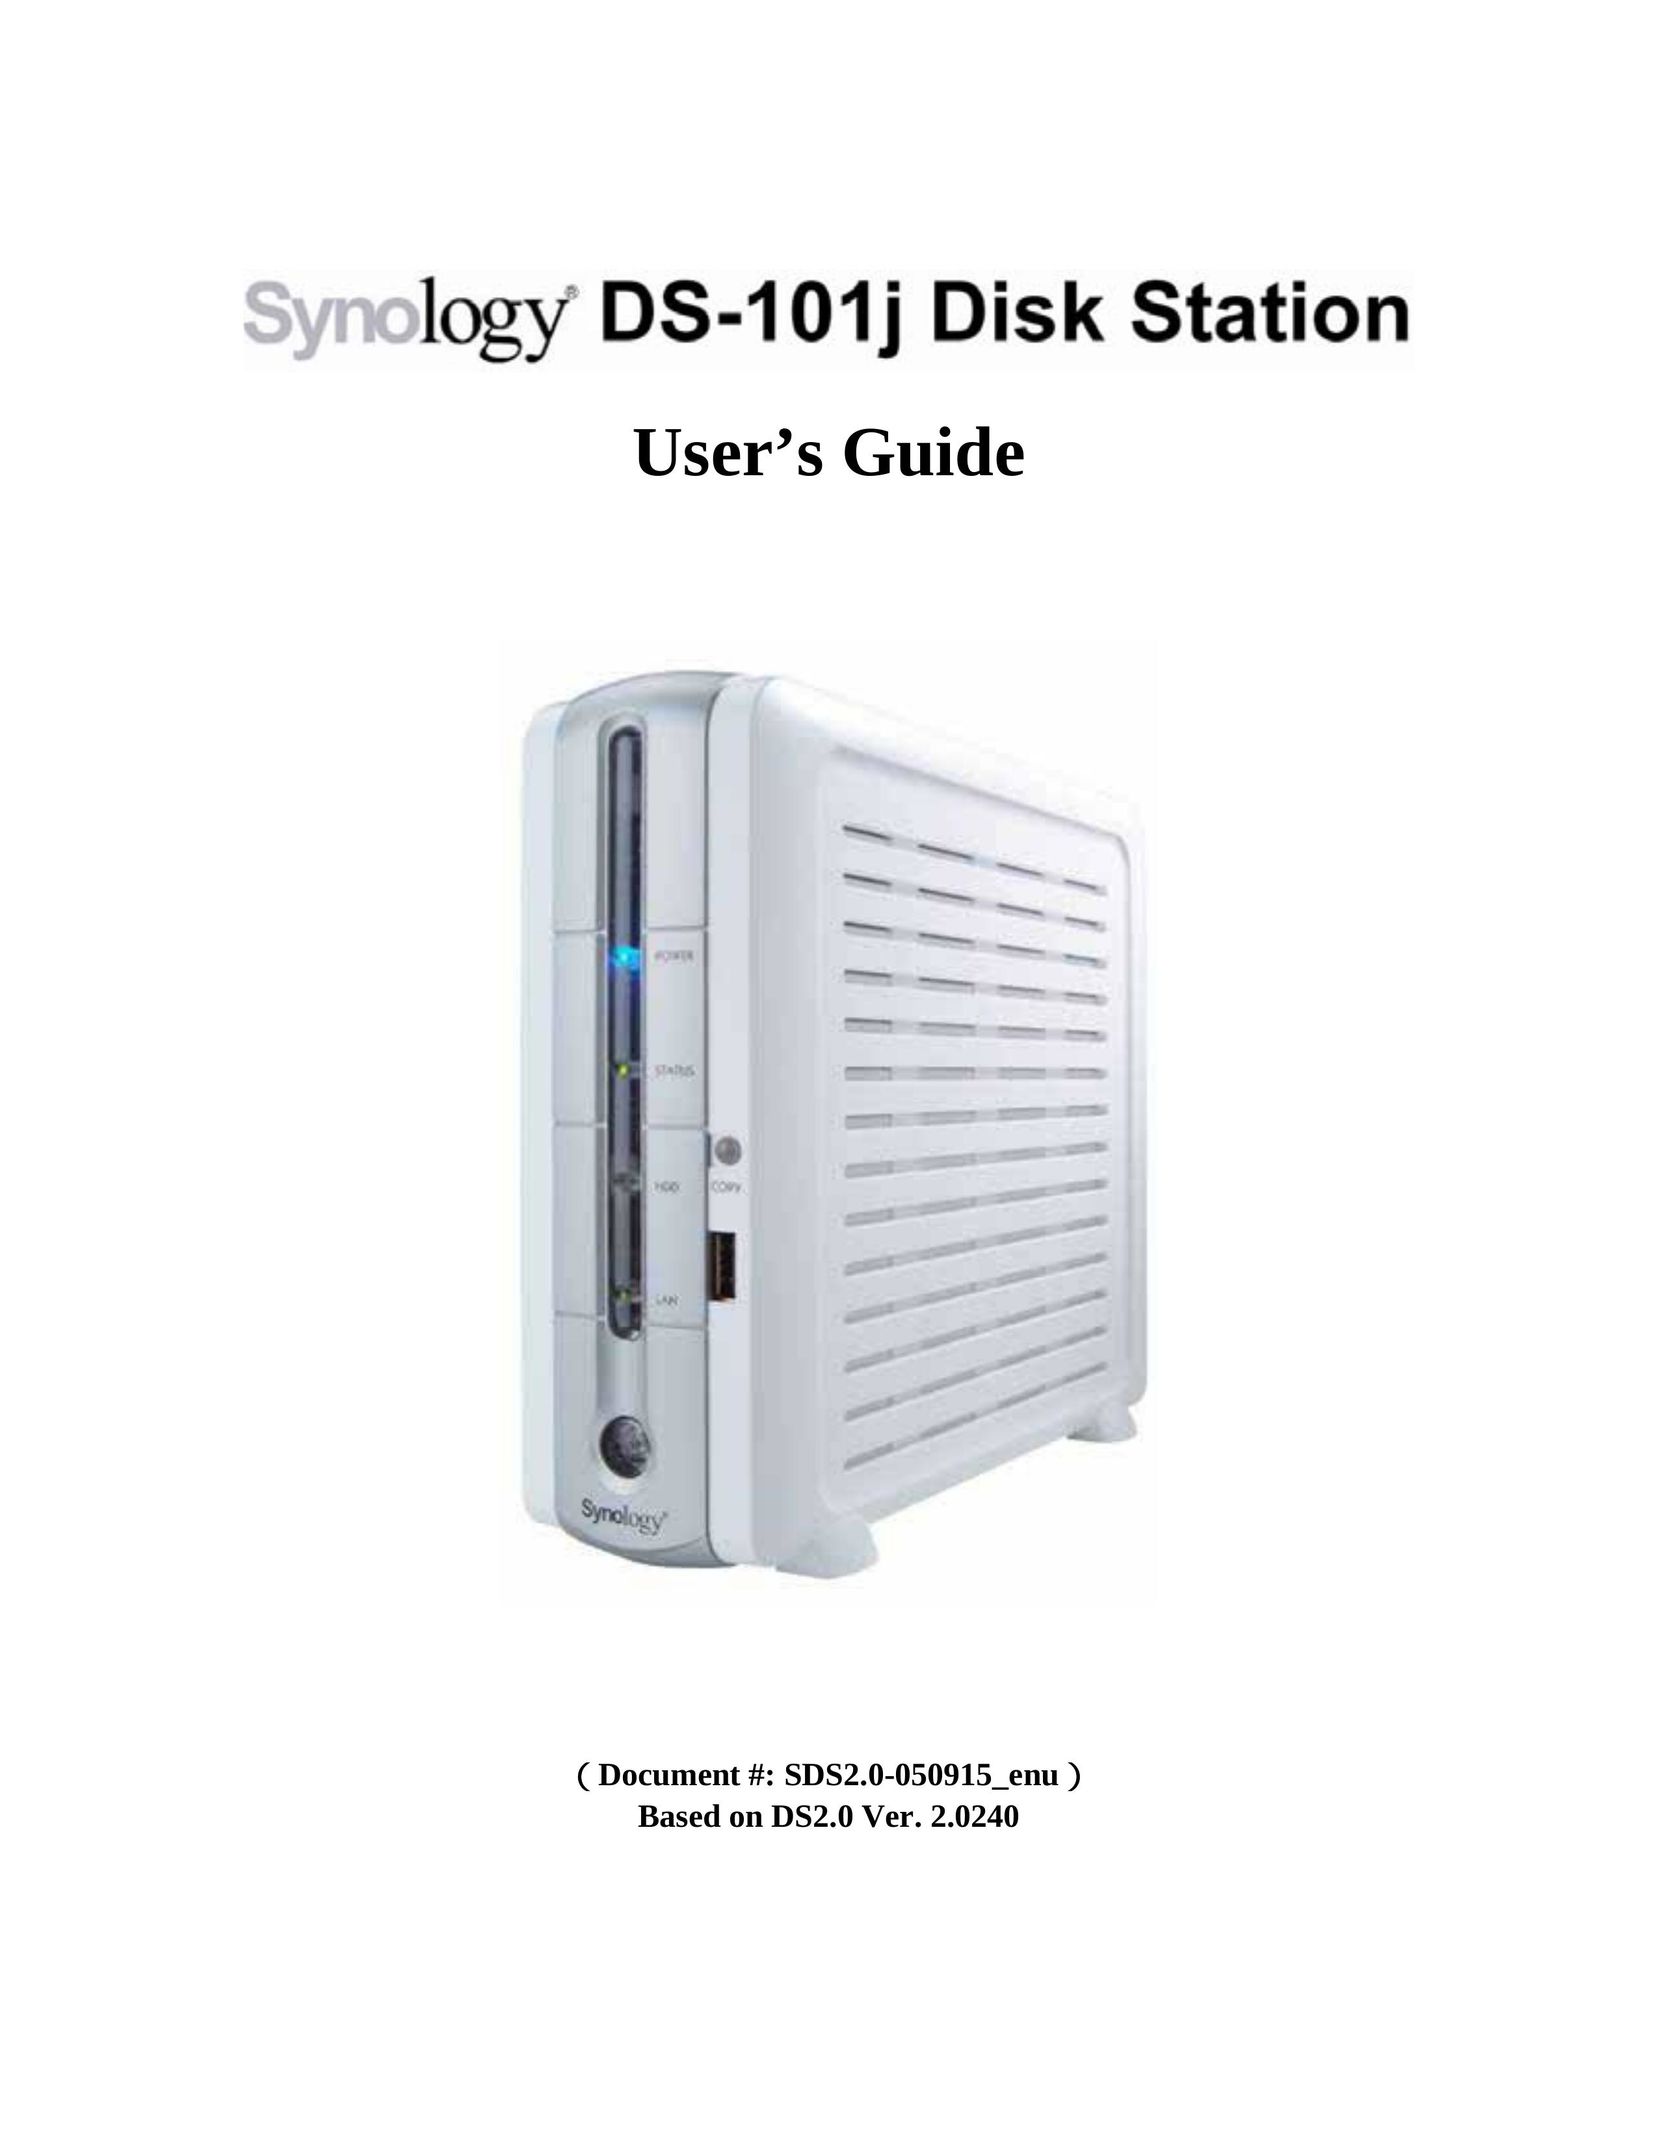 Synology DS2.0 Ver. 2.0240 TV DVD Combo User Manual